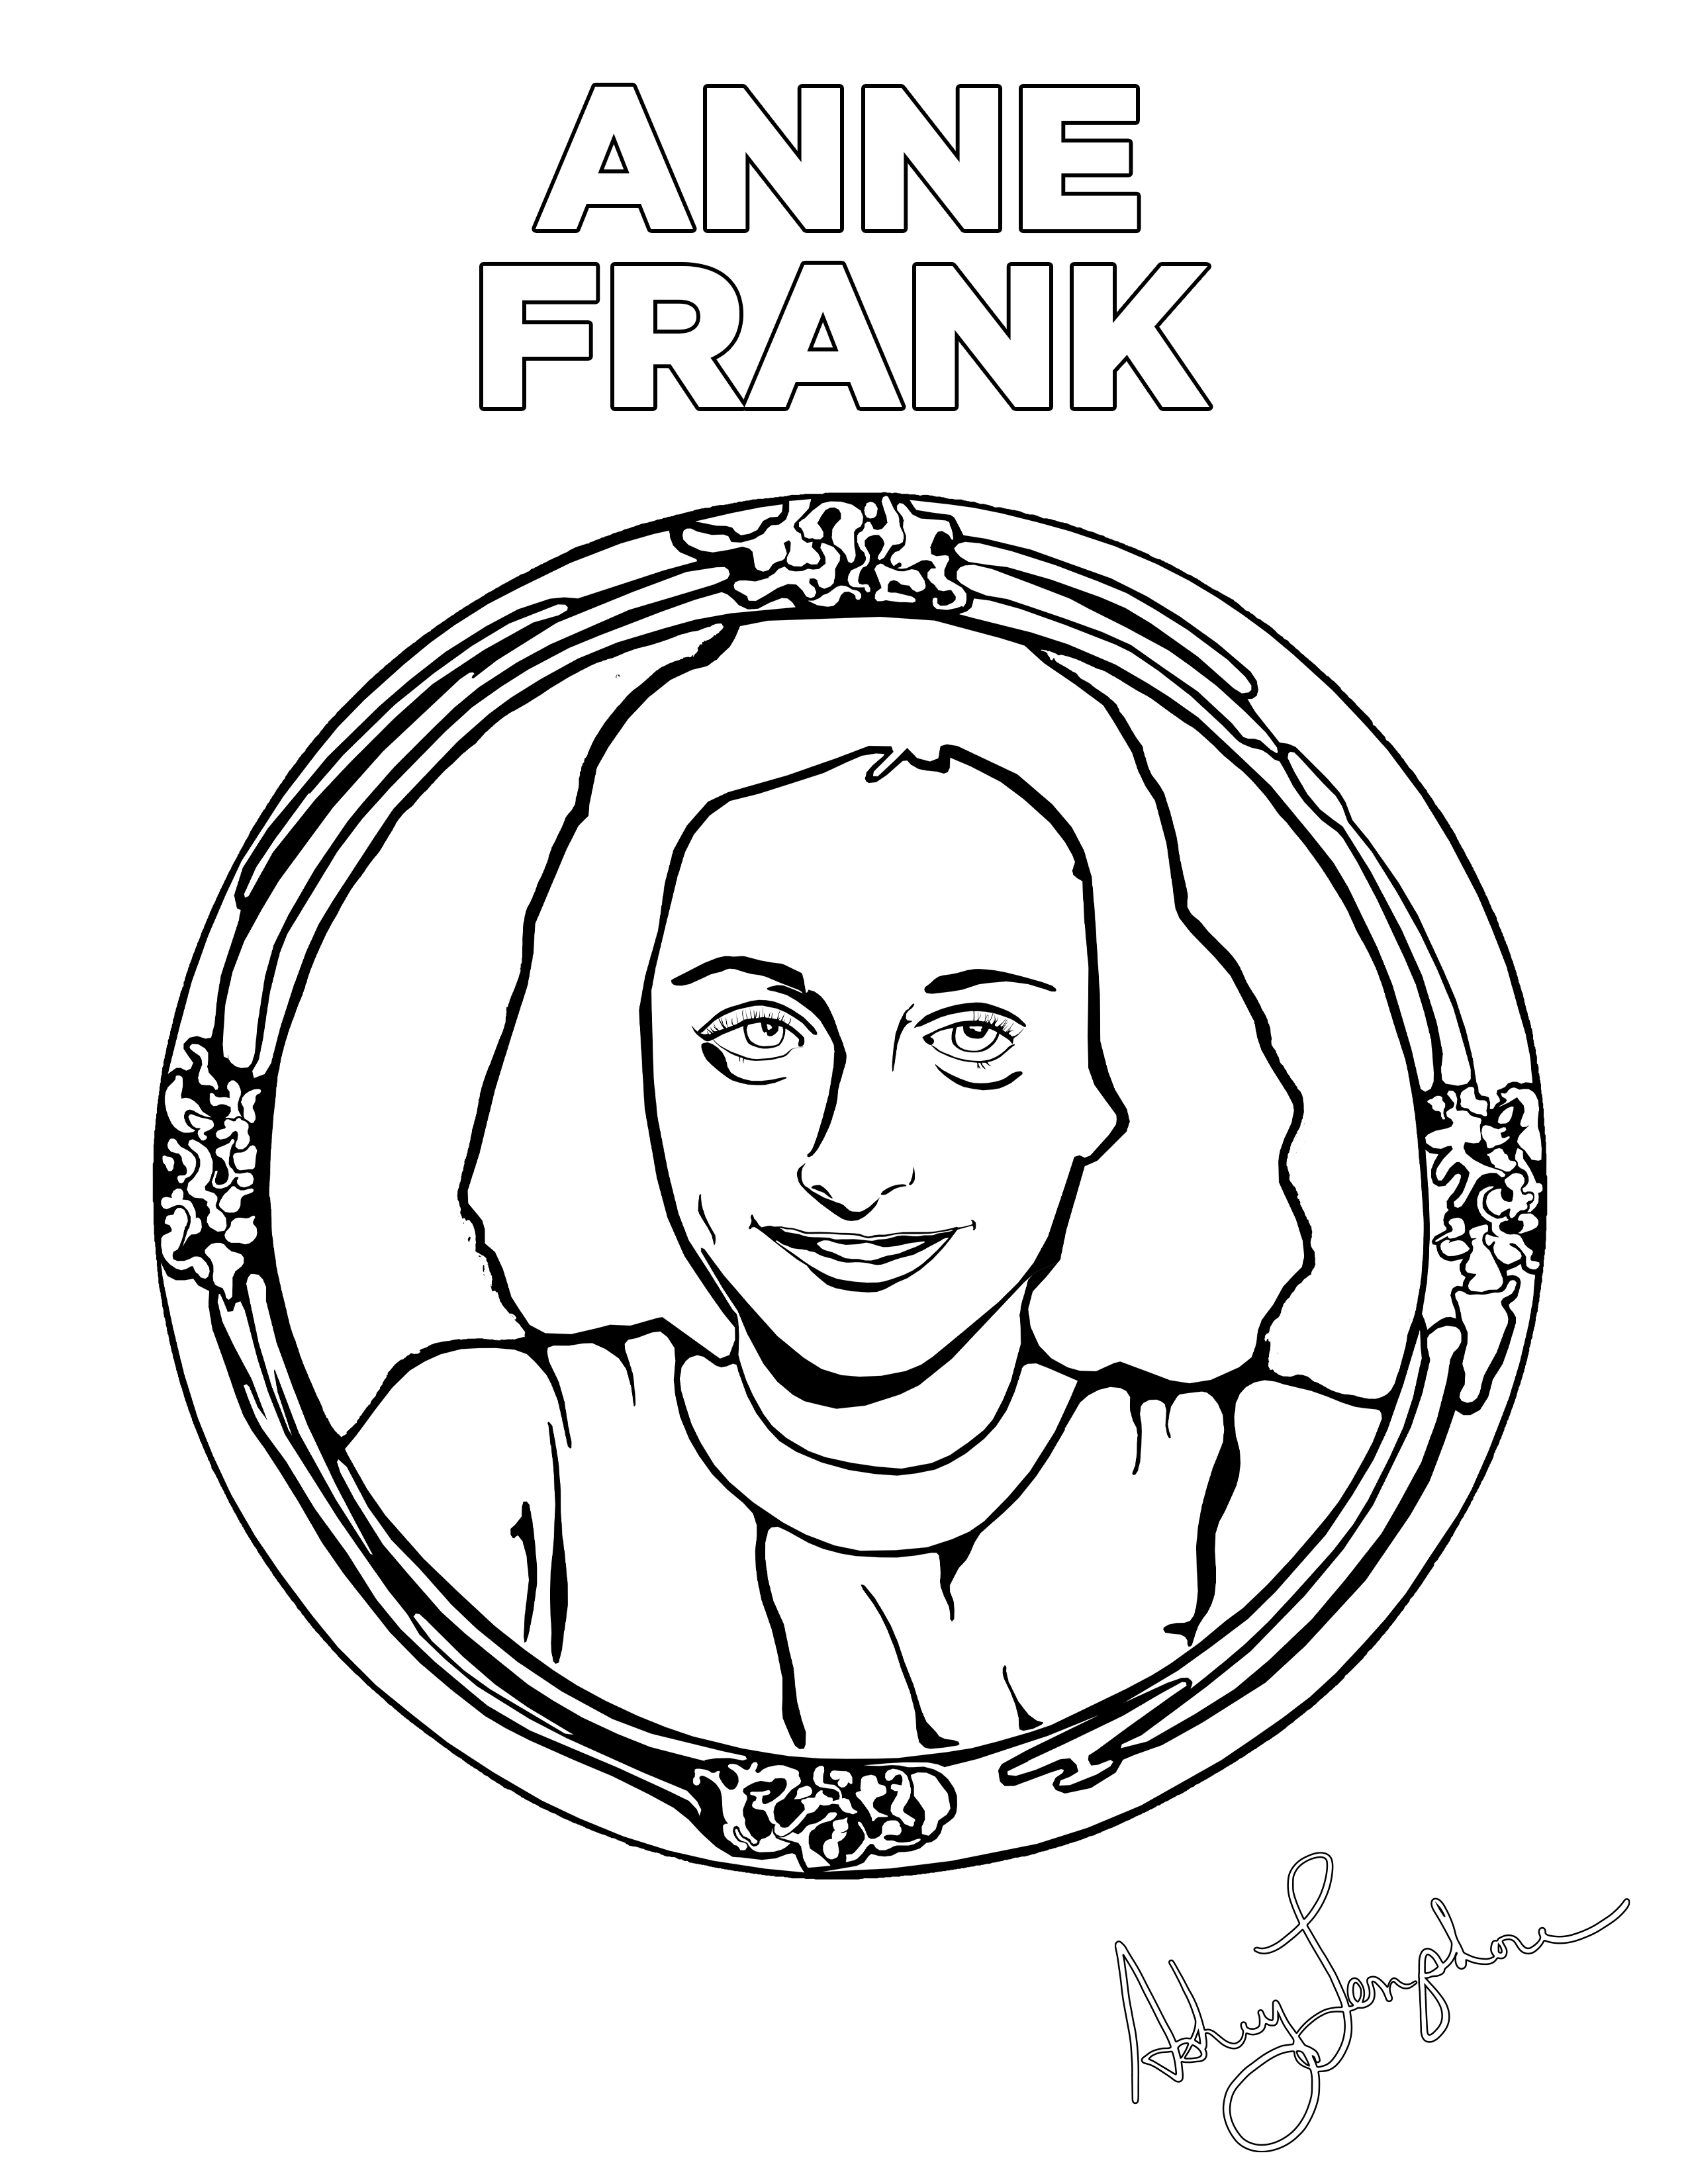 Ashley Longshore coloring pages featuring Anne Frank.